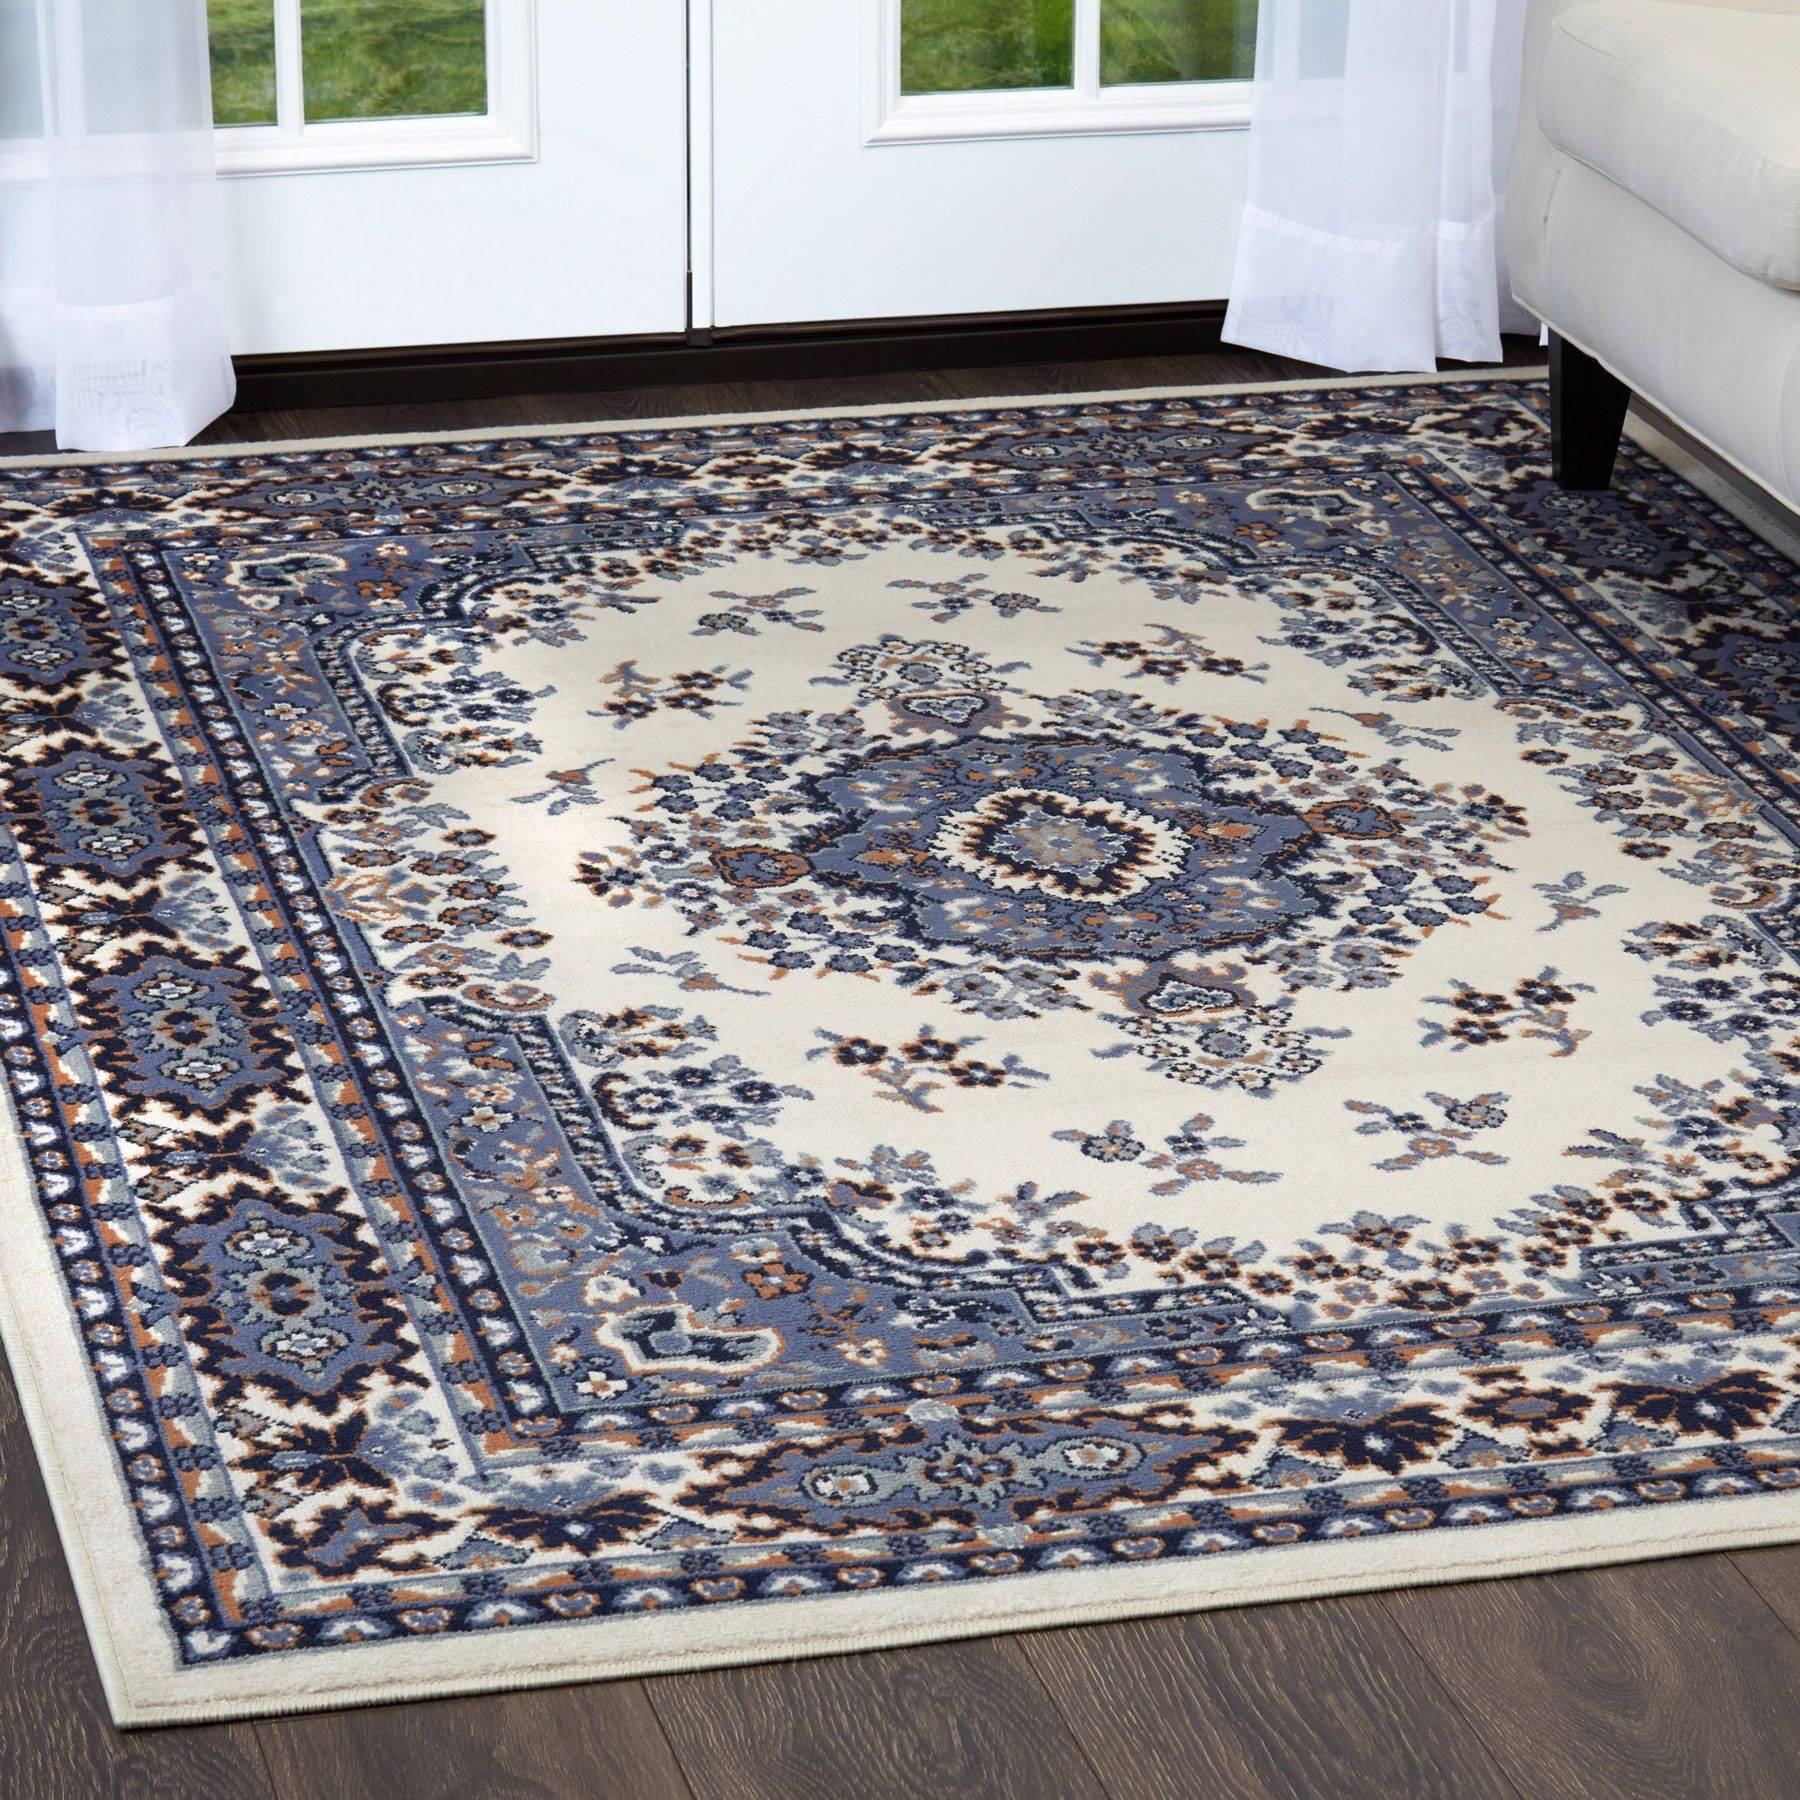 Vicious reccomend Asian style rugs